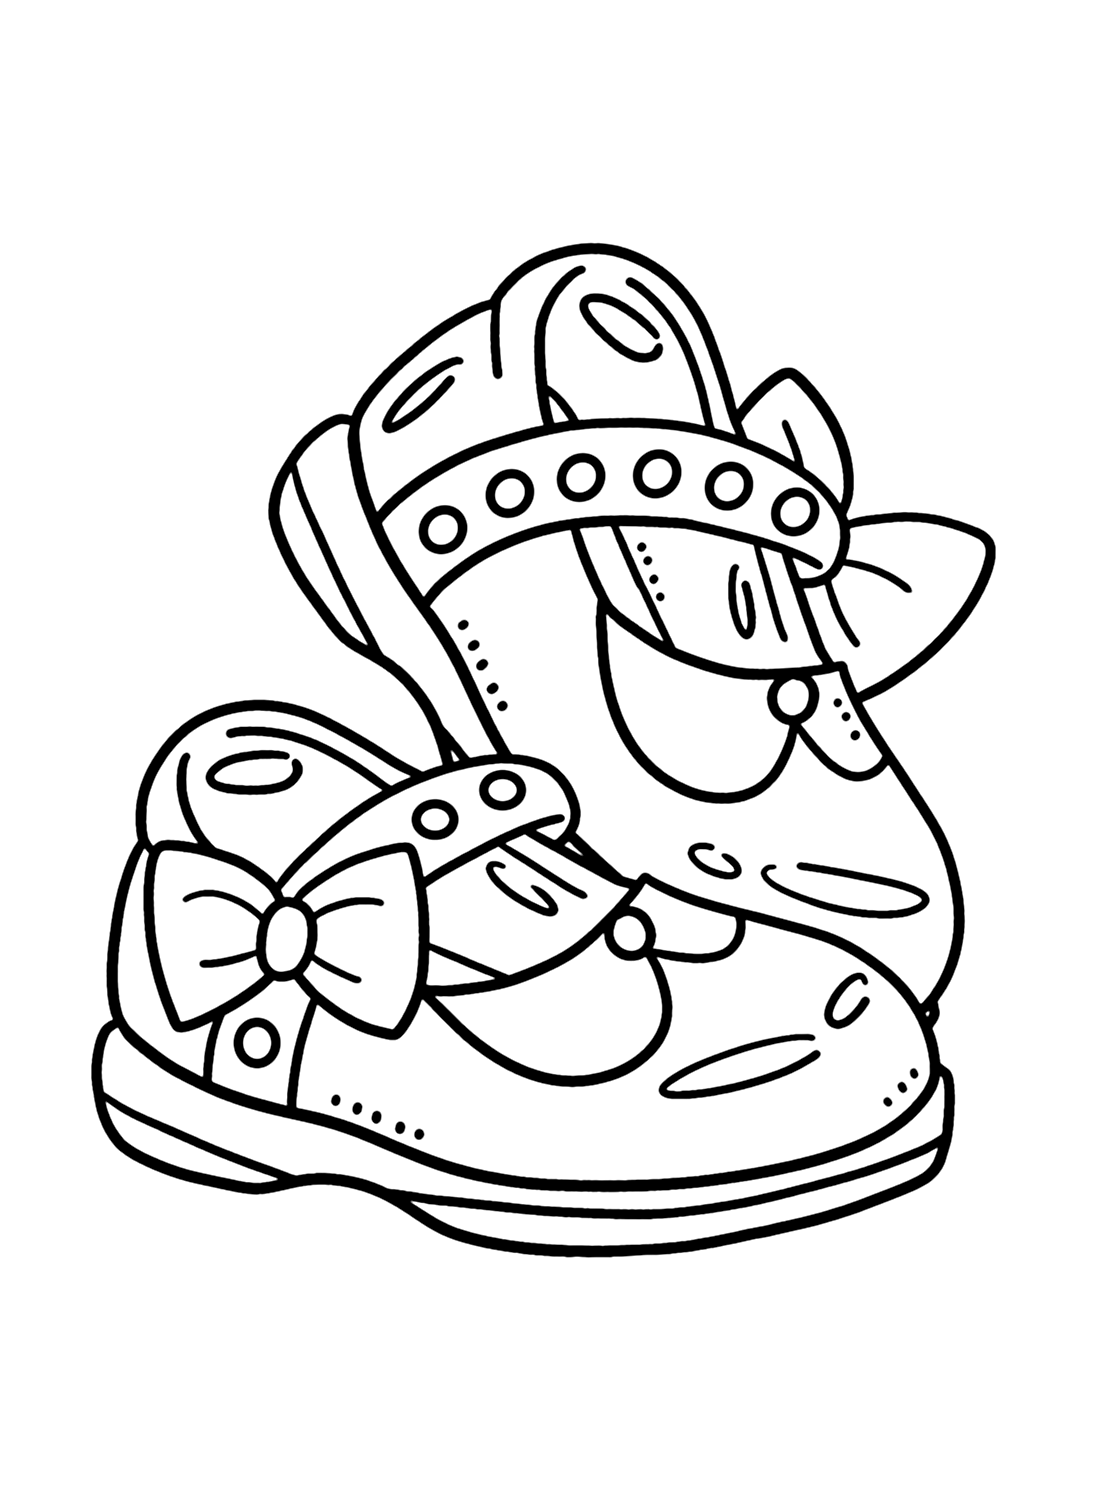 Baby girl shoes coloring page